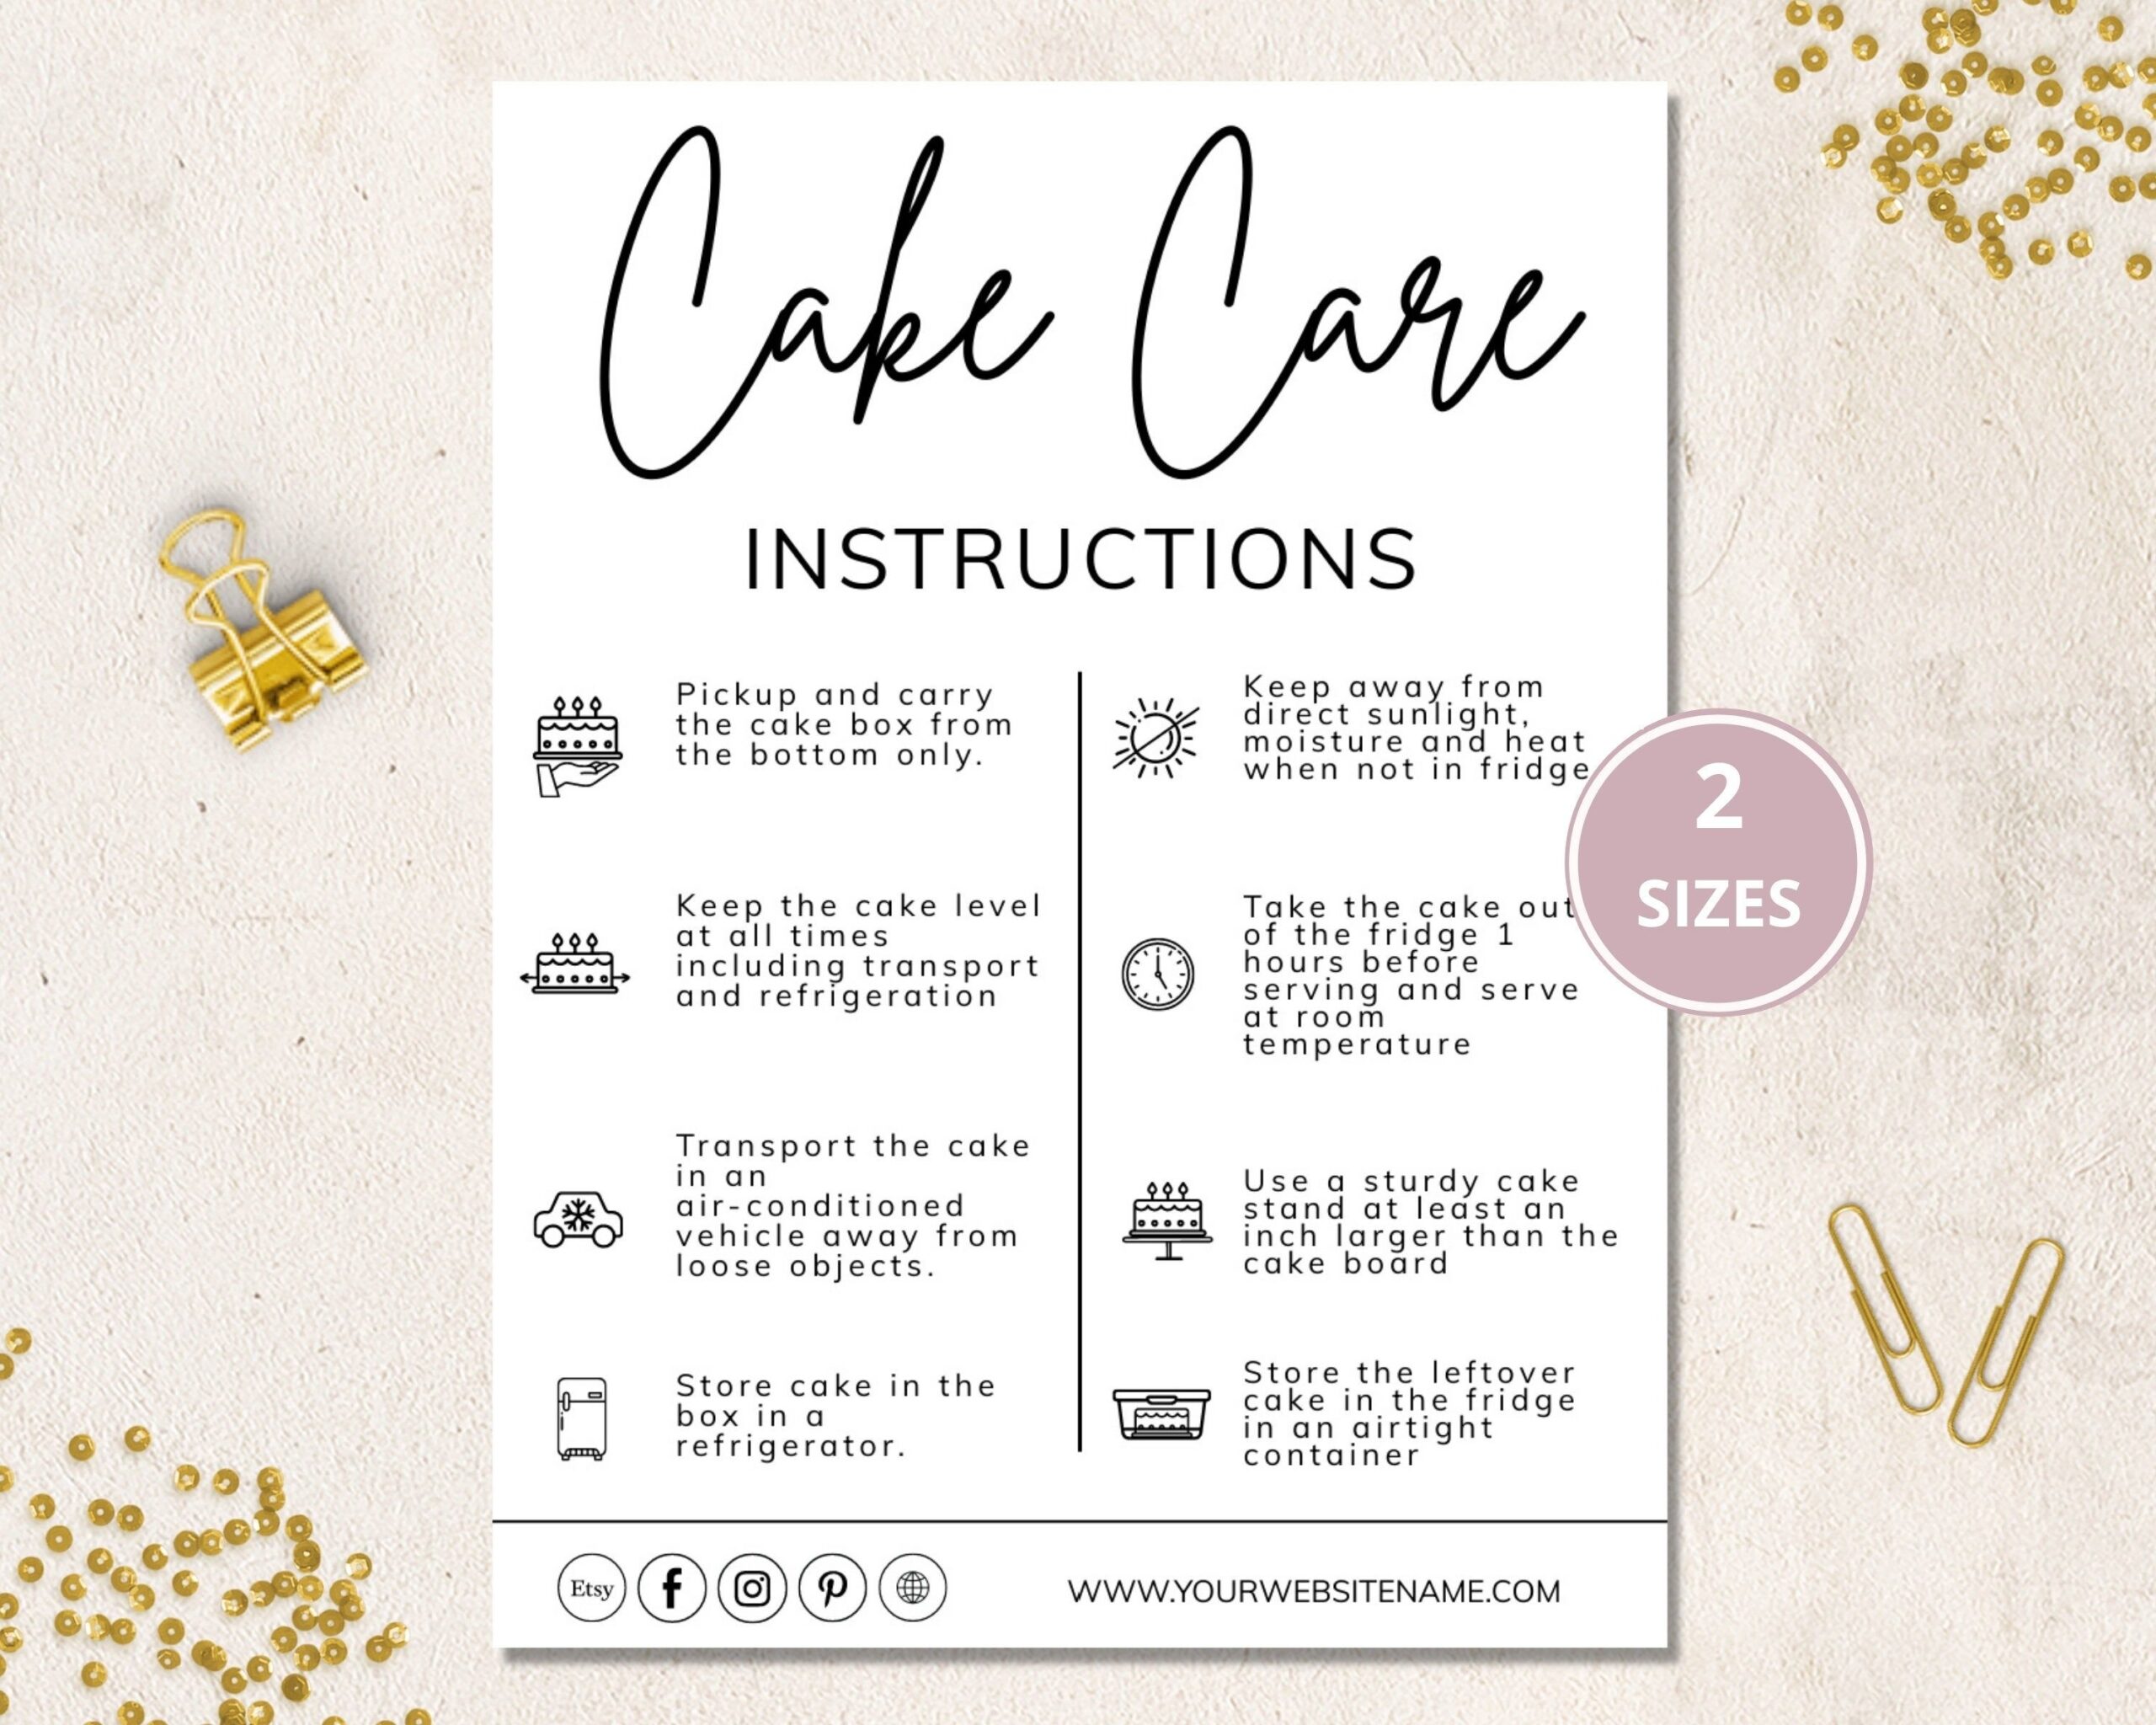 Cake Care Card Editable Template Wedding Cake Care Cards Printable Cake Care Guide Cake Instructions Card Instant Download DTP 031 Etsy Card Template Card Templates Free Cake Templates